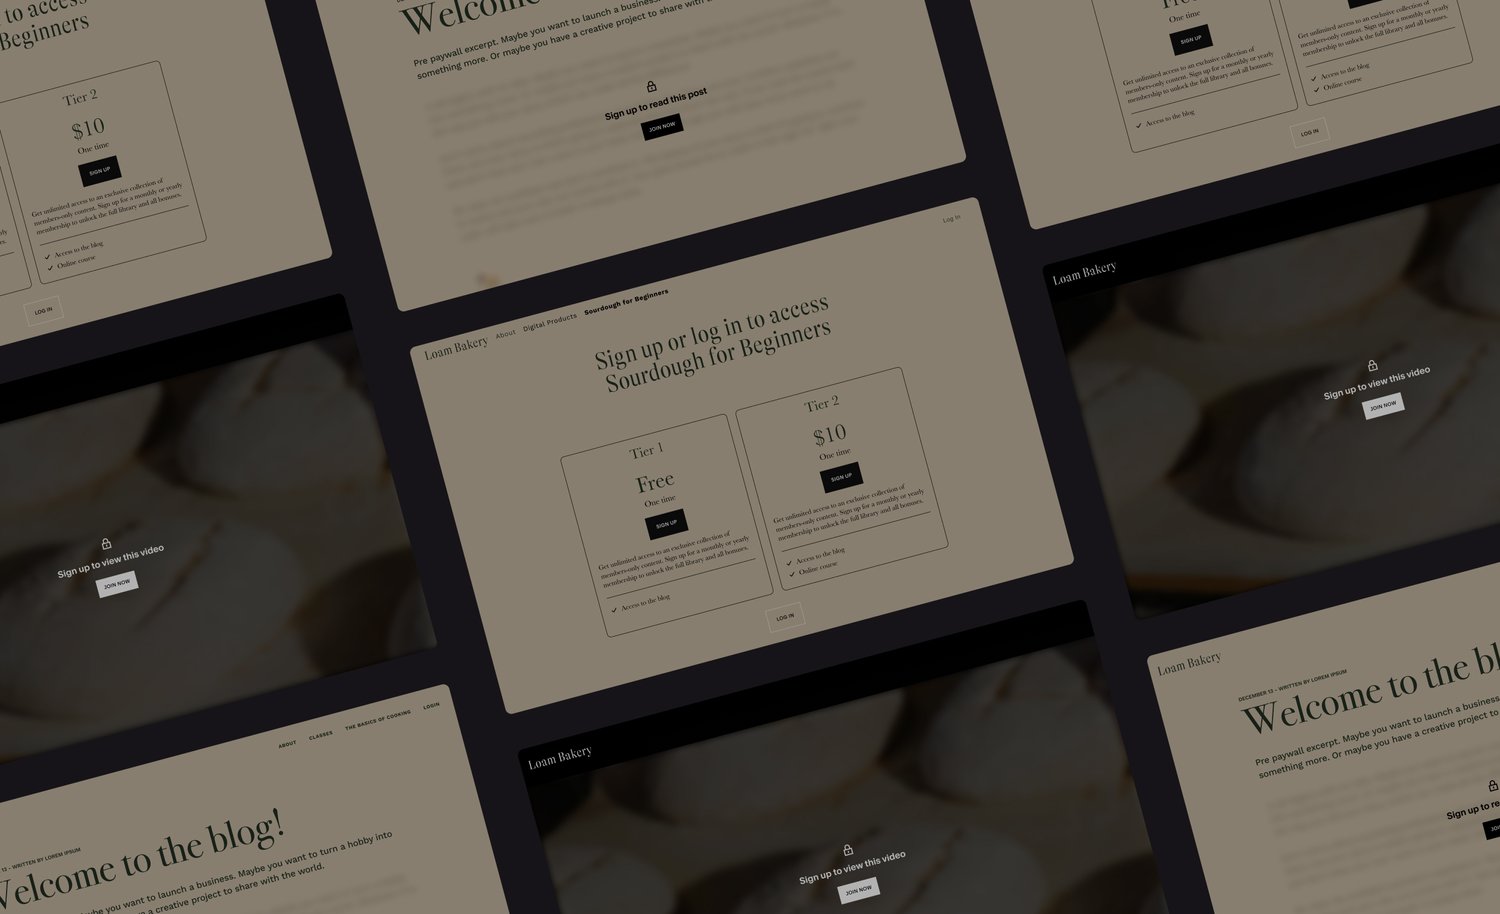 Squarespace adds subscription features to enable recurring revenue from content (2 minute read)